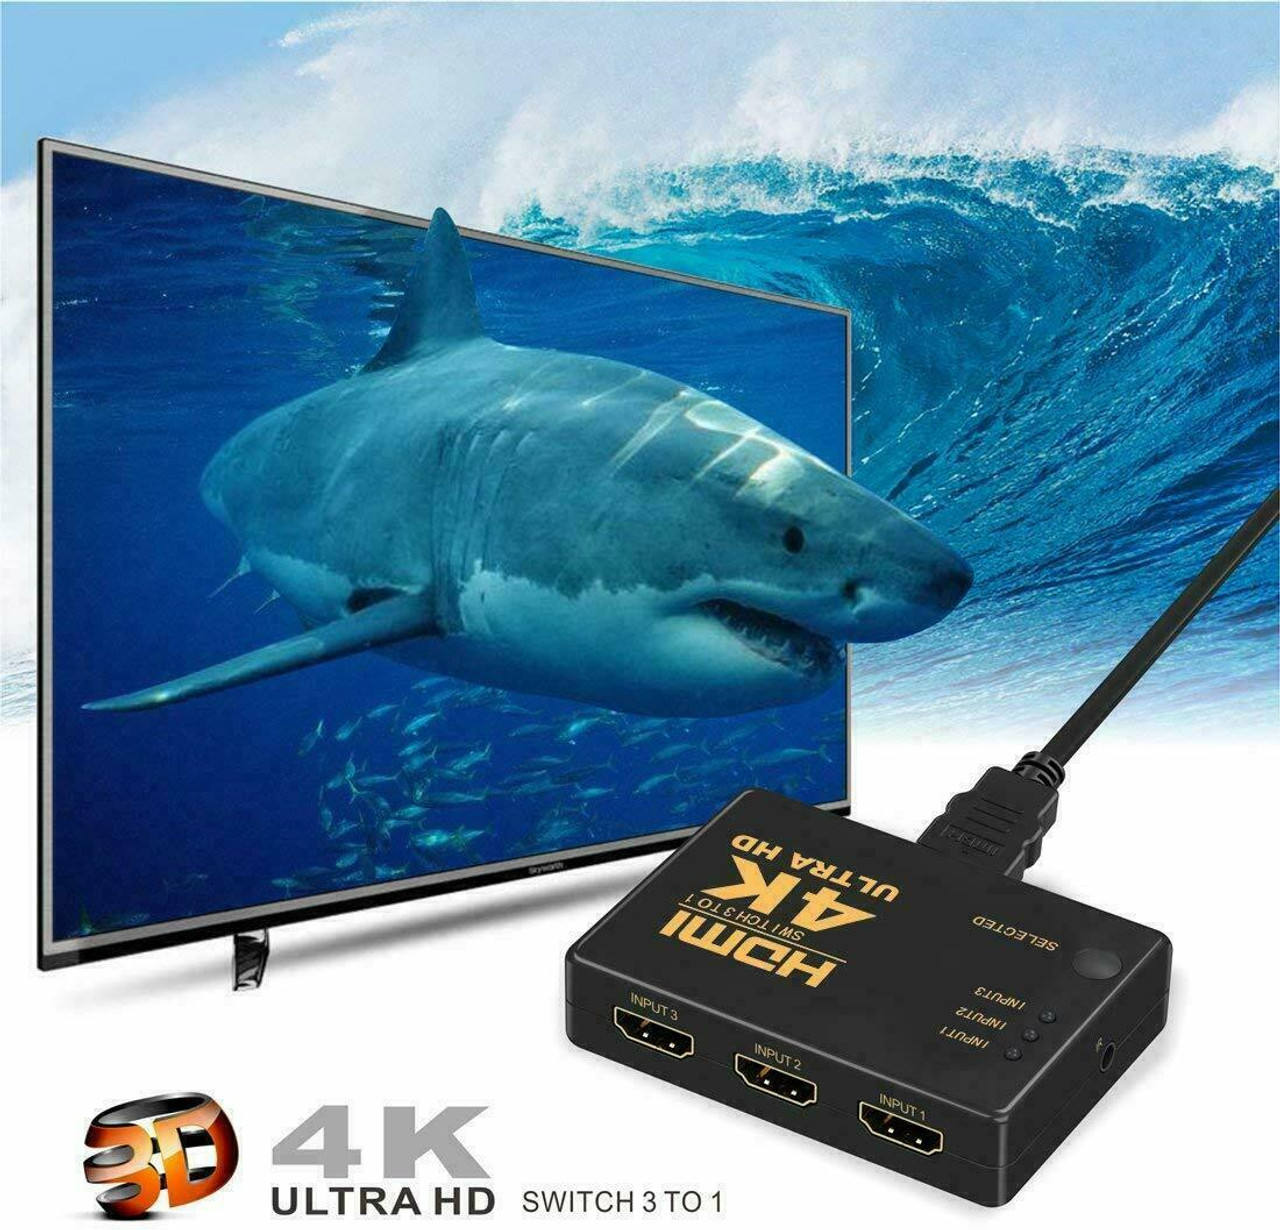 4K HDMI 2.0 Cable Splitter Switch Box Hub 3D IR Remote Control 3X1 Power 3 to 1